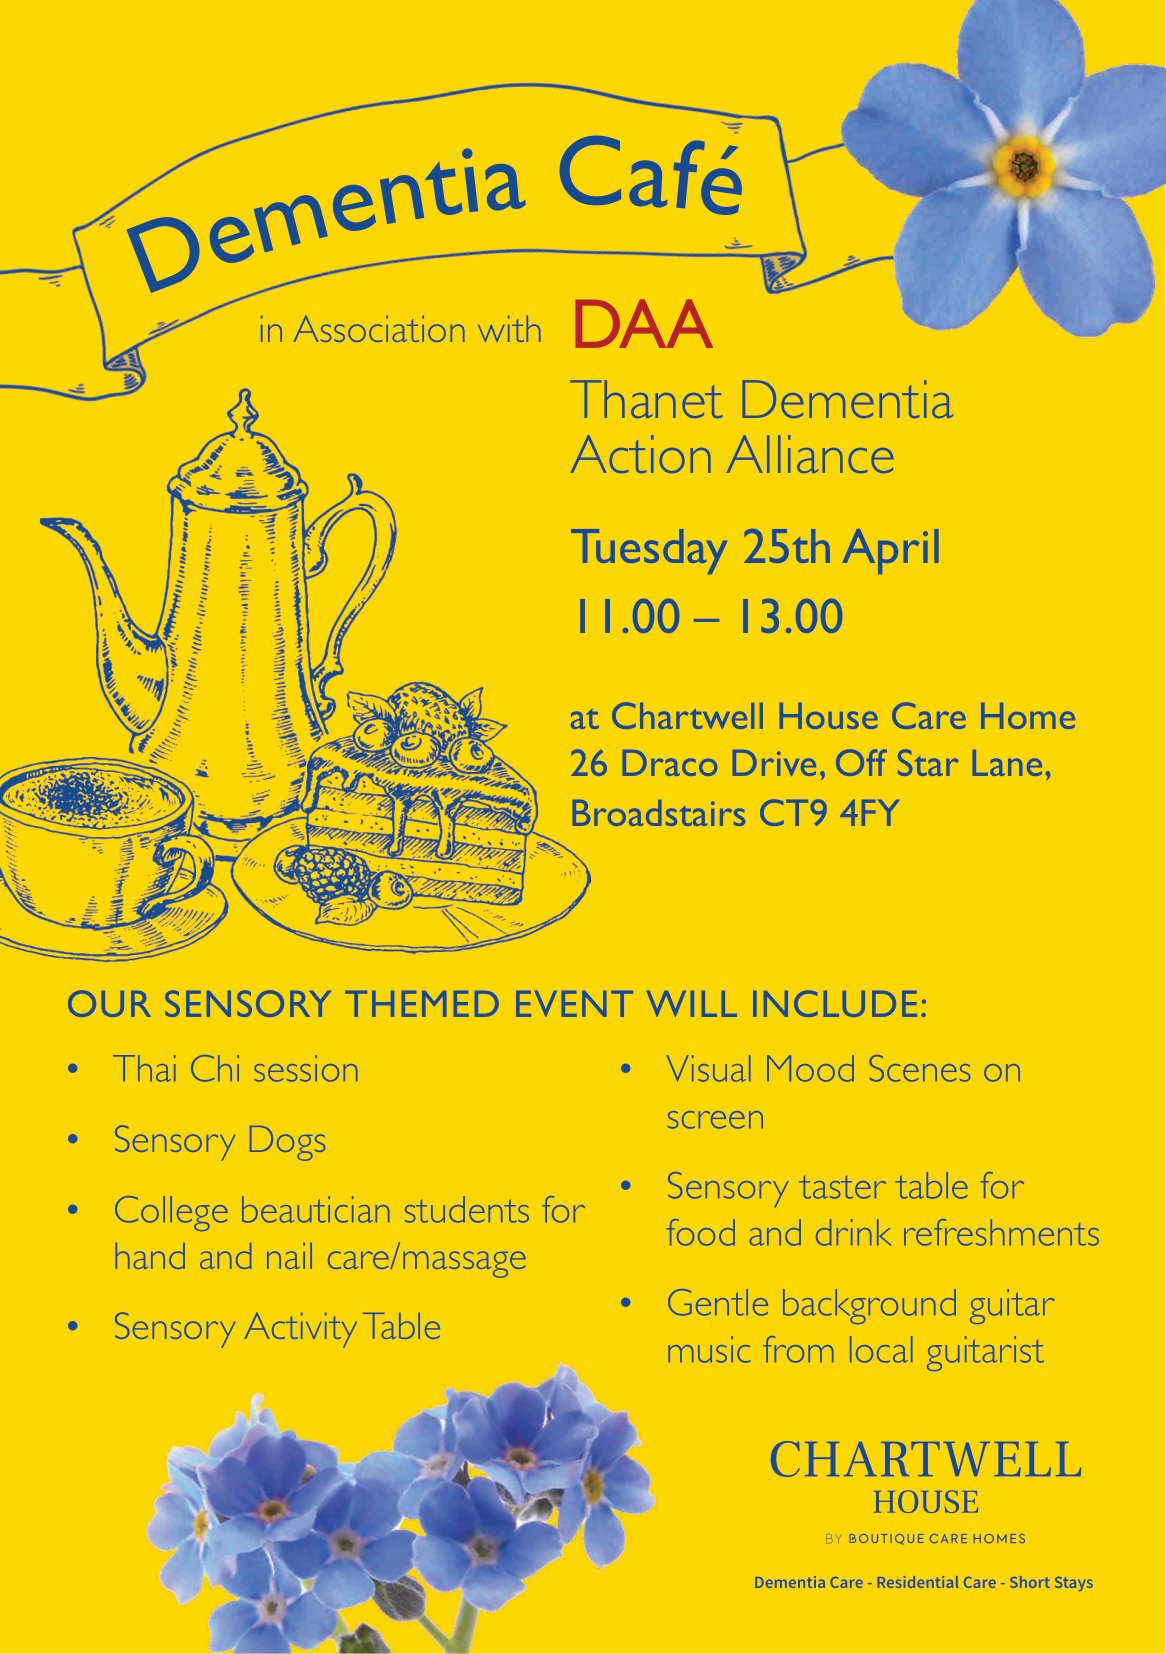 Chartwell House Hosts Thanet DAA on Tuesday 25th April from 11.00 to 13.00.